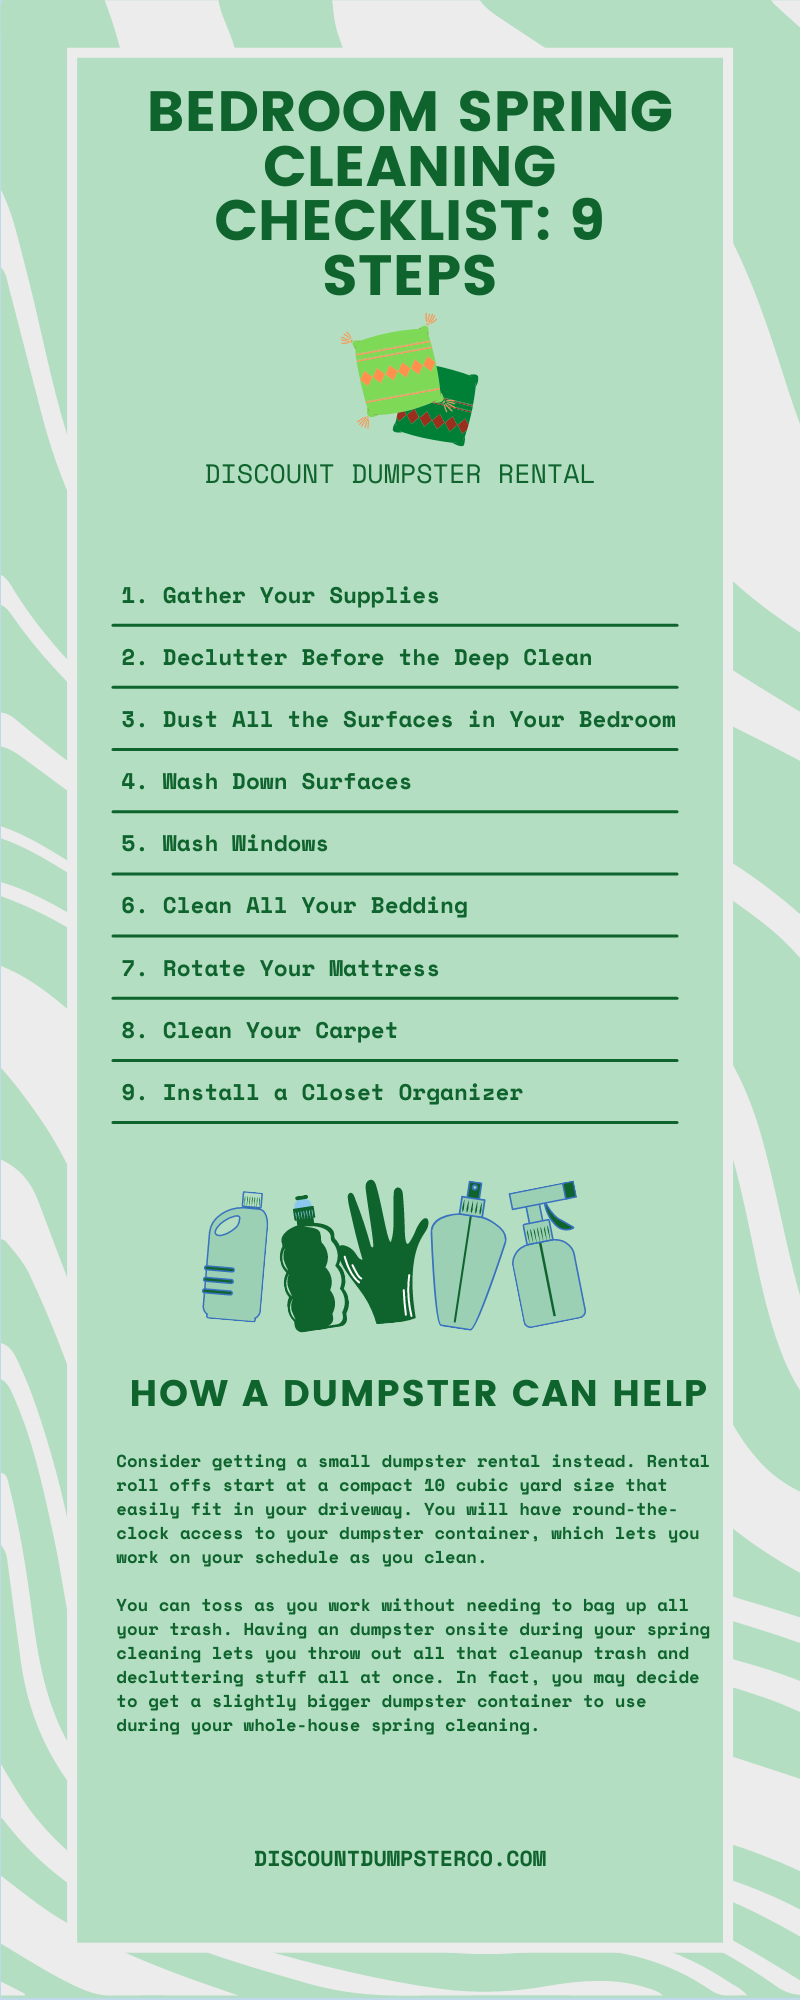 https://discountdumpsterco.com/wp-content/uploads/Bedroom-Spring-Cleaning-Checklist-Infographic.png